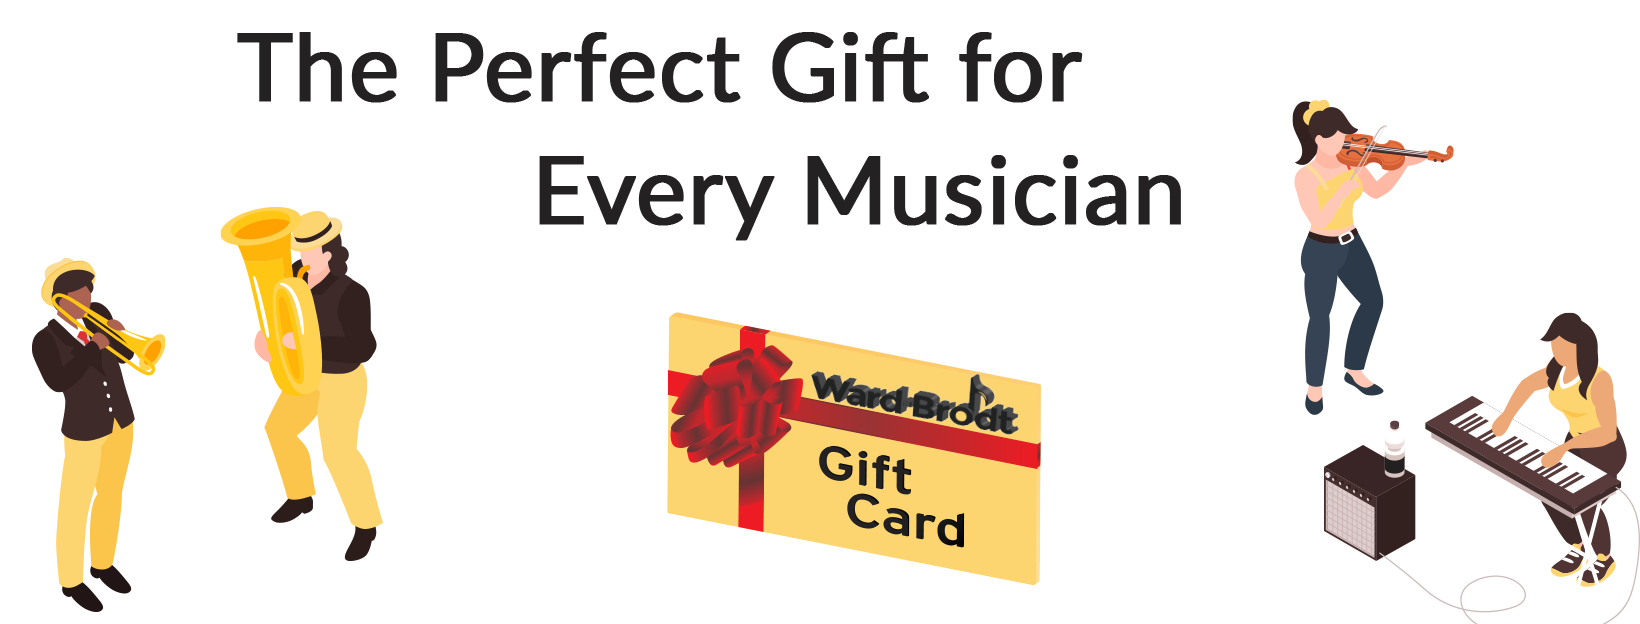 Gift Card Promo with Musicians